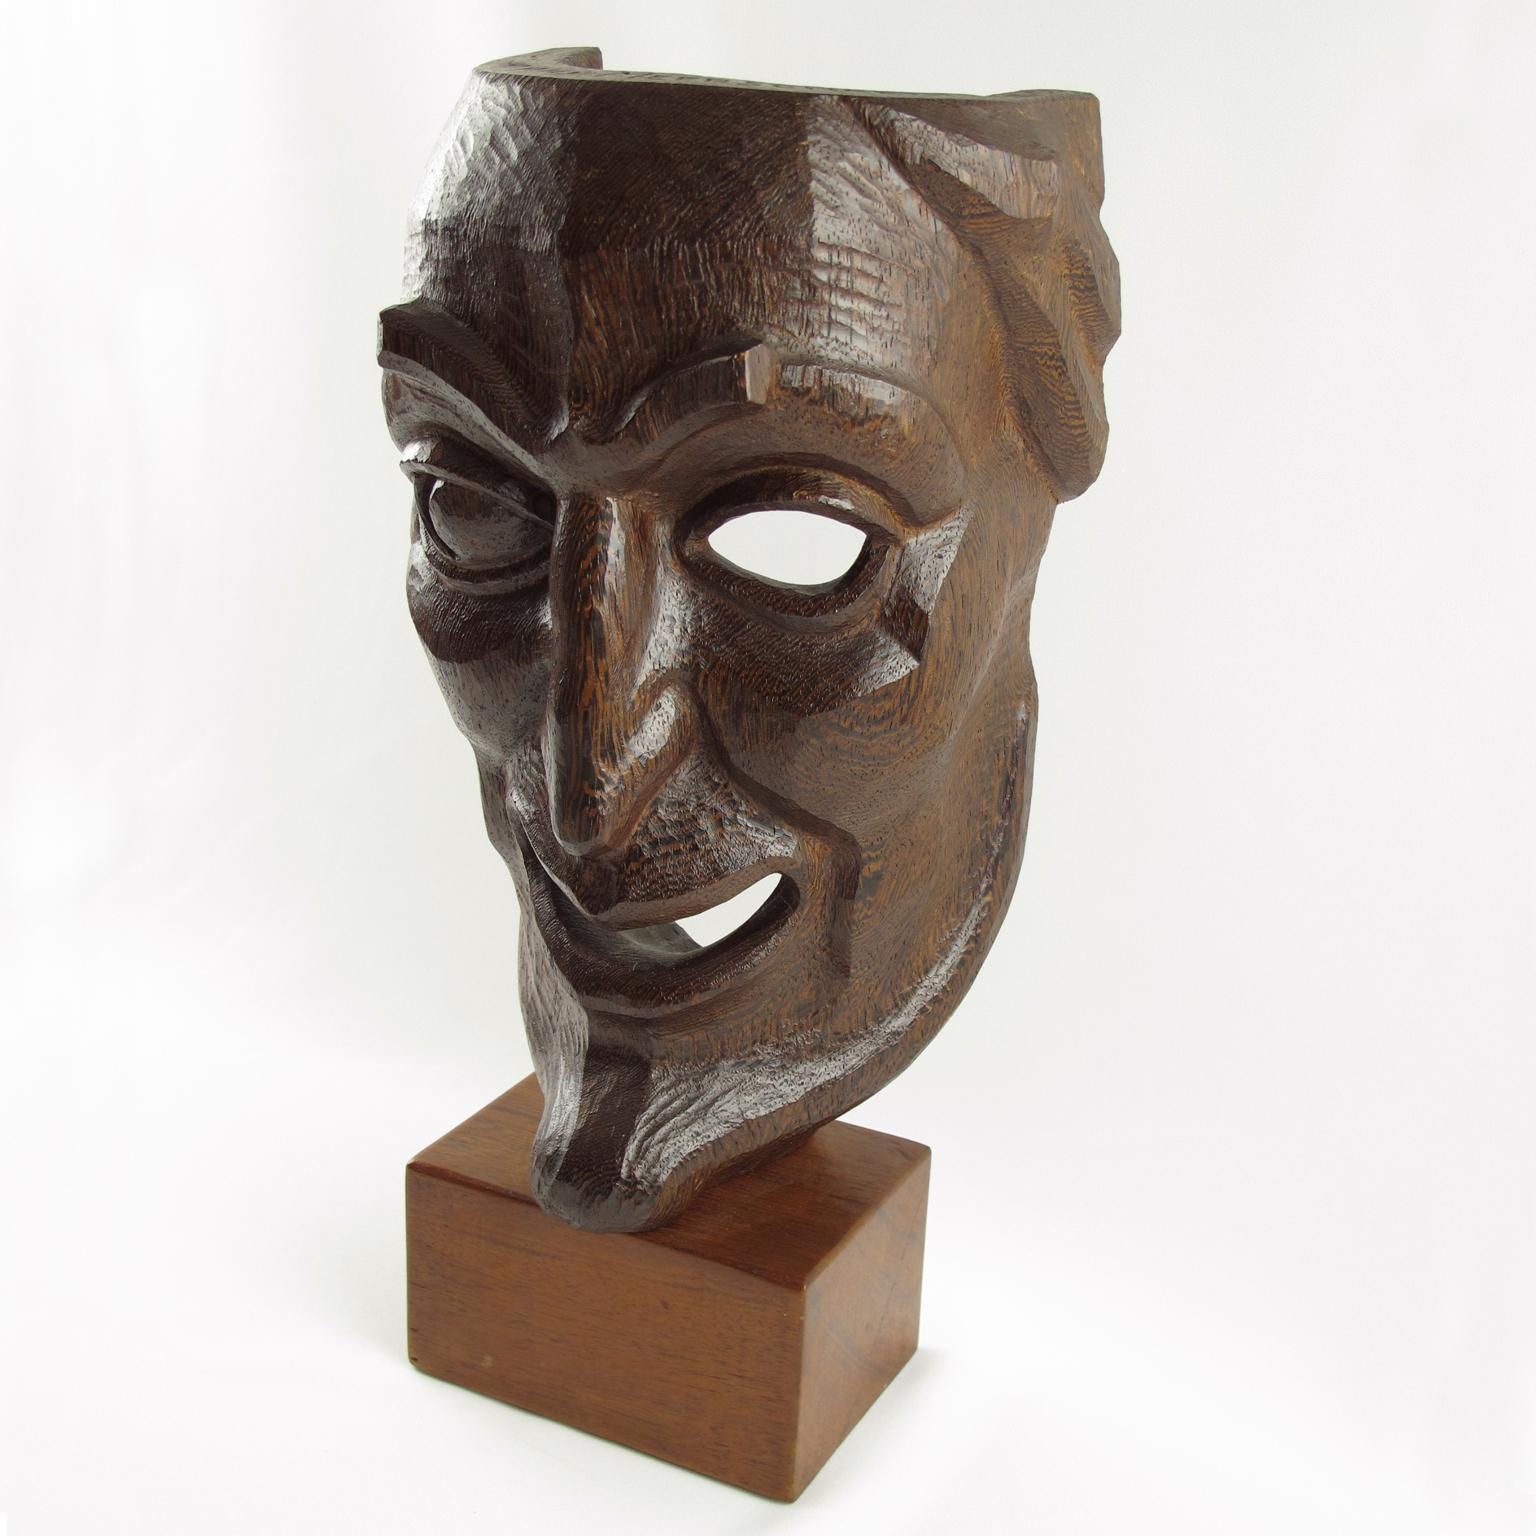 Stunning mid-20th Century hand-carved wood mask sculpture. Palmwood with a beautiful carving with fine detailing and texture, featuring a caricature character in the style of La Comedia Dell'Arte in Italy, but also the classical masks from the